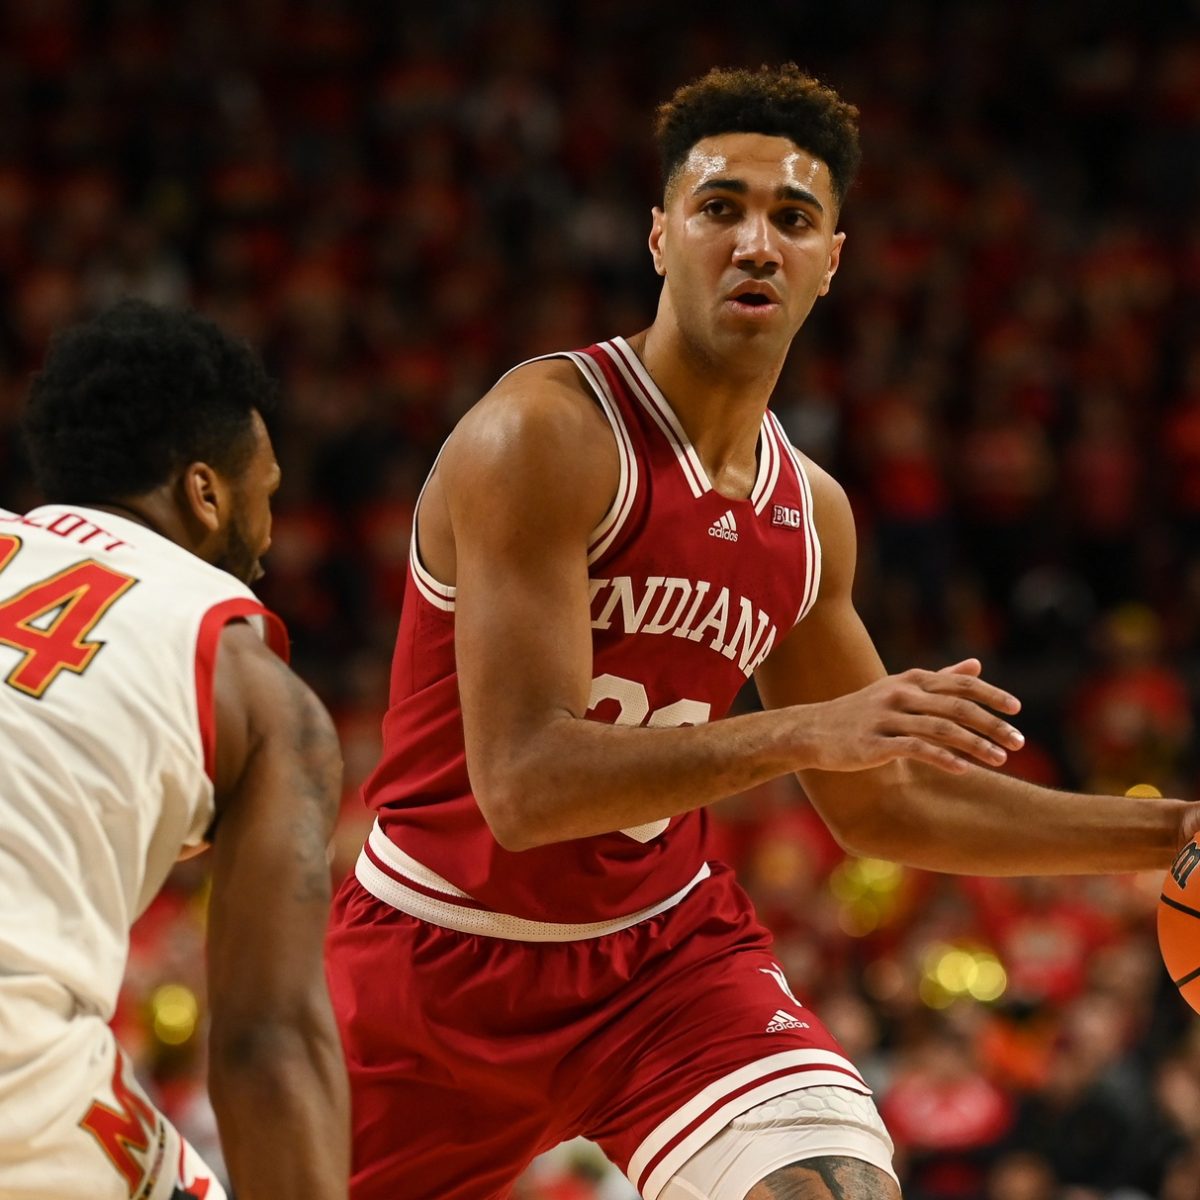 Illinois vs. Indiana Prediction, Preview, and Odds – 2-18-2023